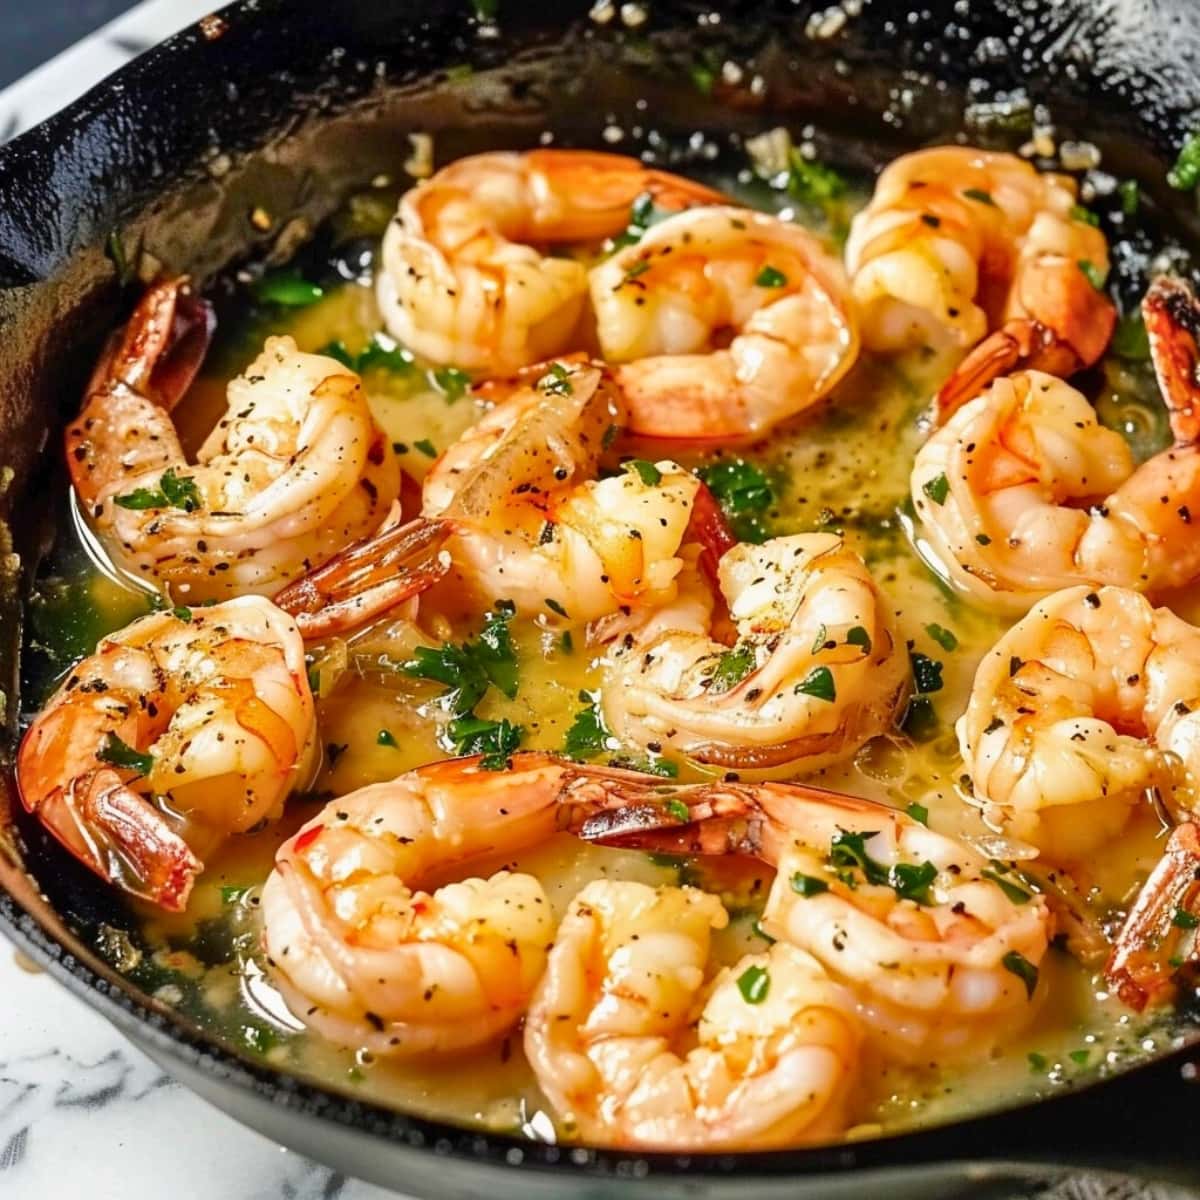 Shrimp in garlic butter sauce cooked in a cast iron pan.